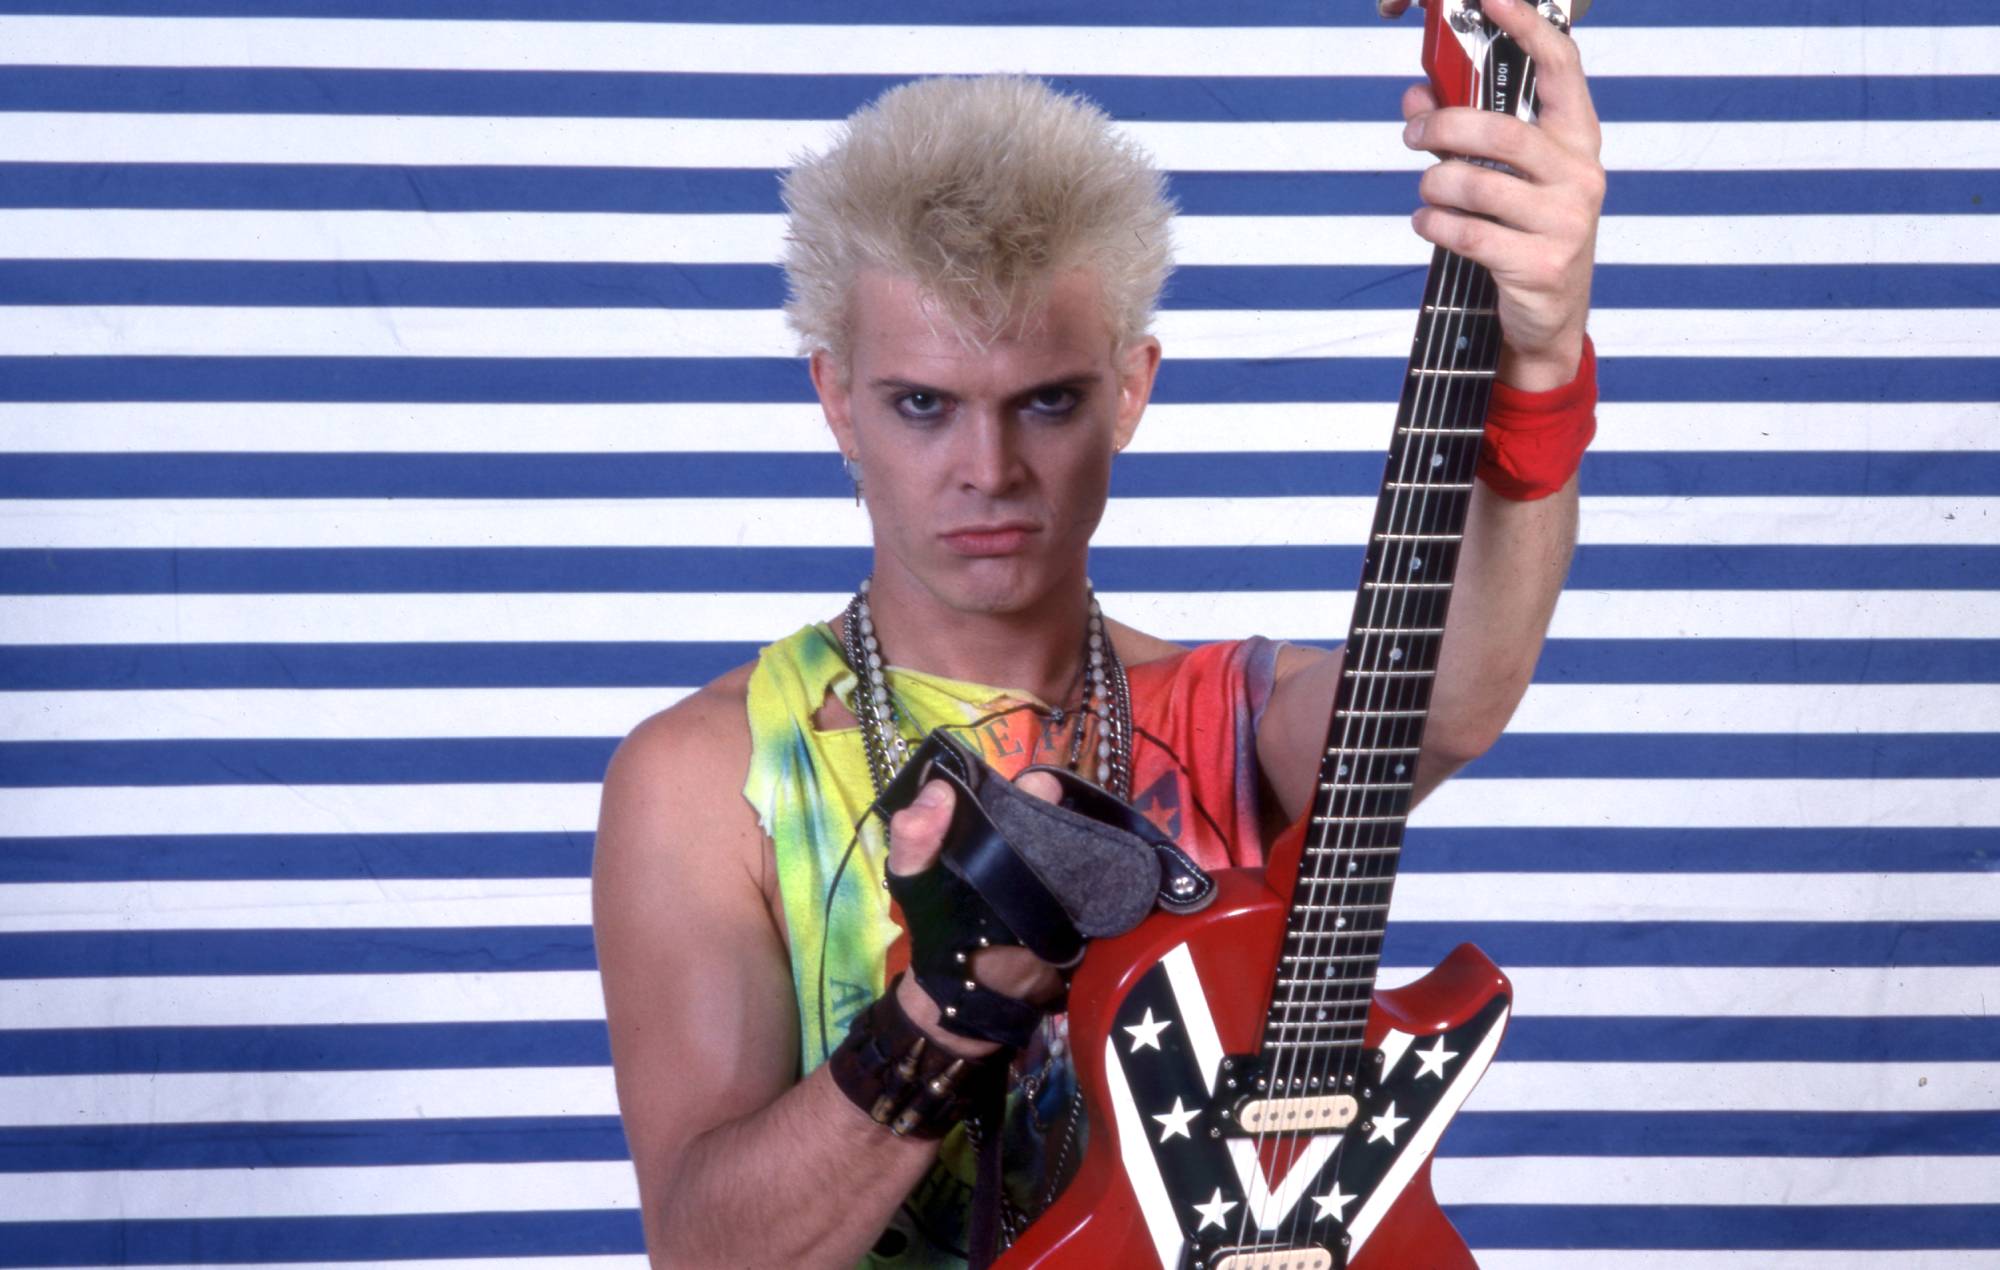 English musician, singer, songwriter, and actor, Billy Idol, poses backstage on May 23, 1987, at the Pine Knob Music Theater in Clarkston, Michigan. (Photo by Ross Marino/Getty Images)